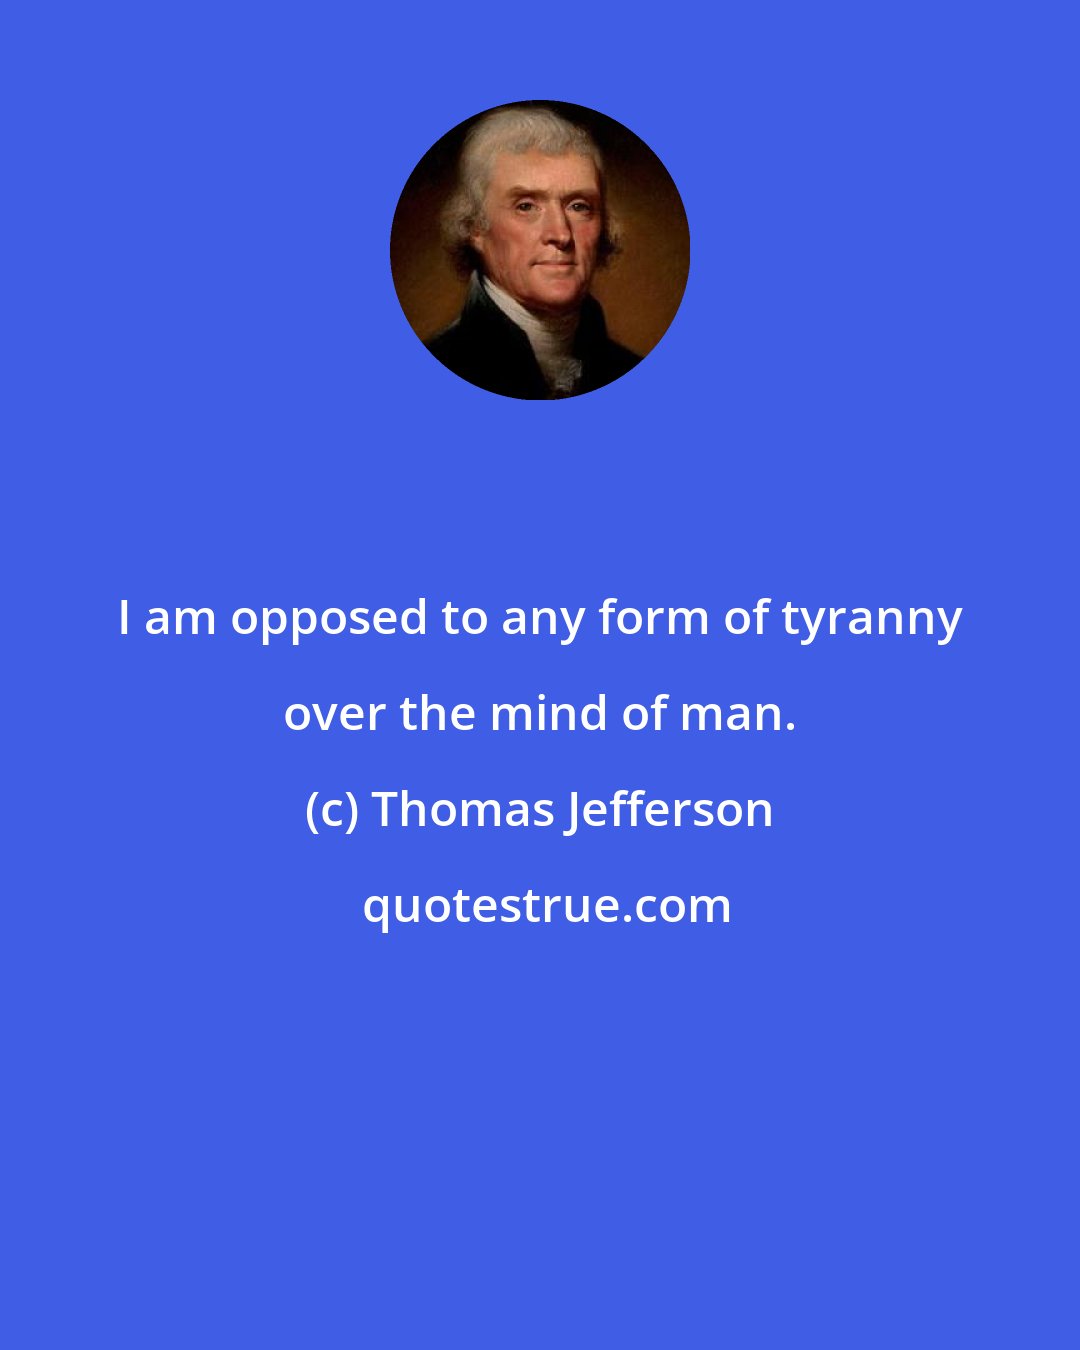 Thomas Jefferson: I am opposed to any form of tyranny over the mind of man.